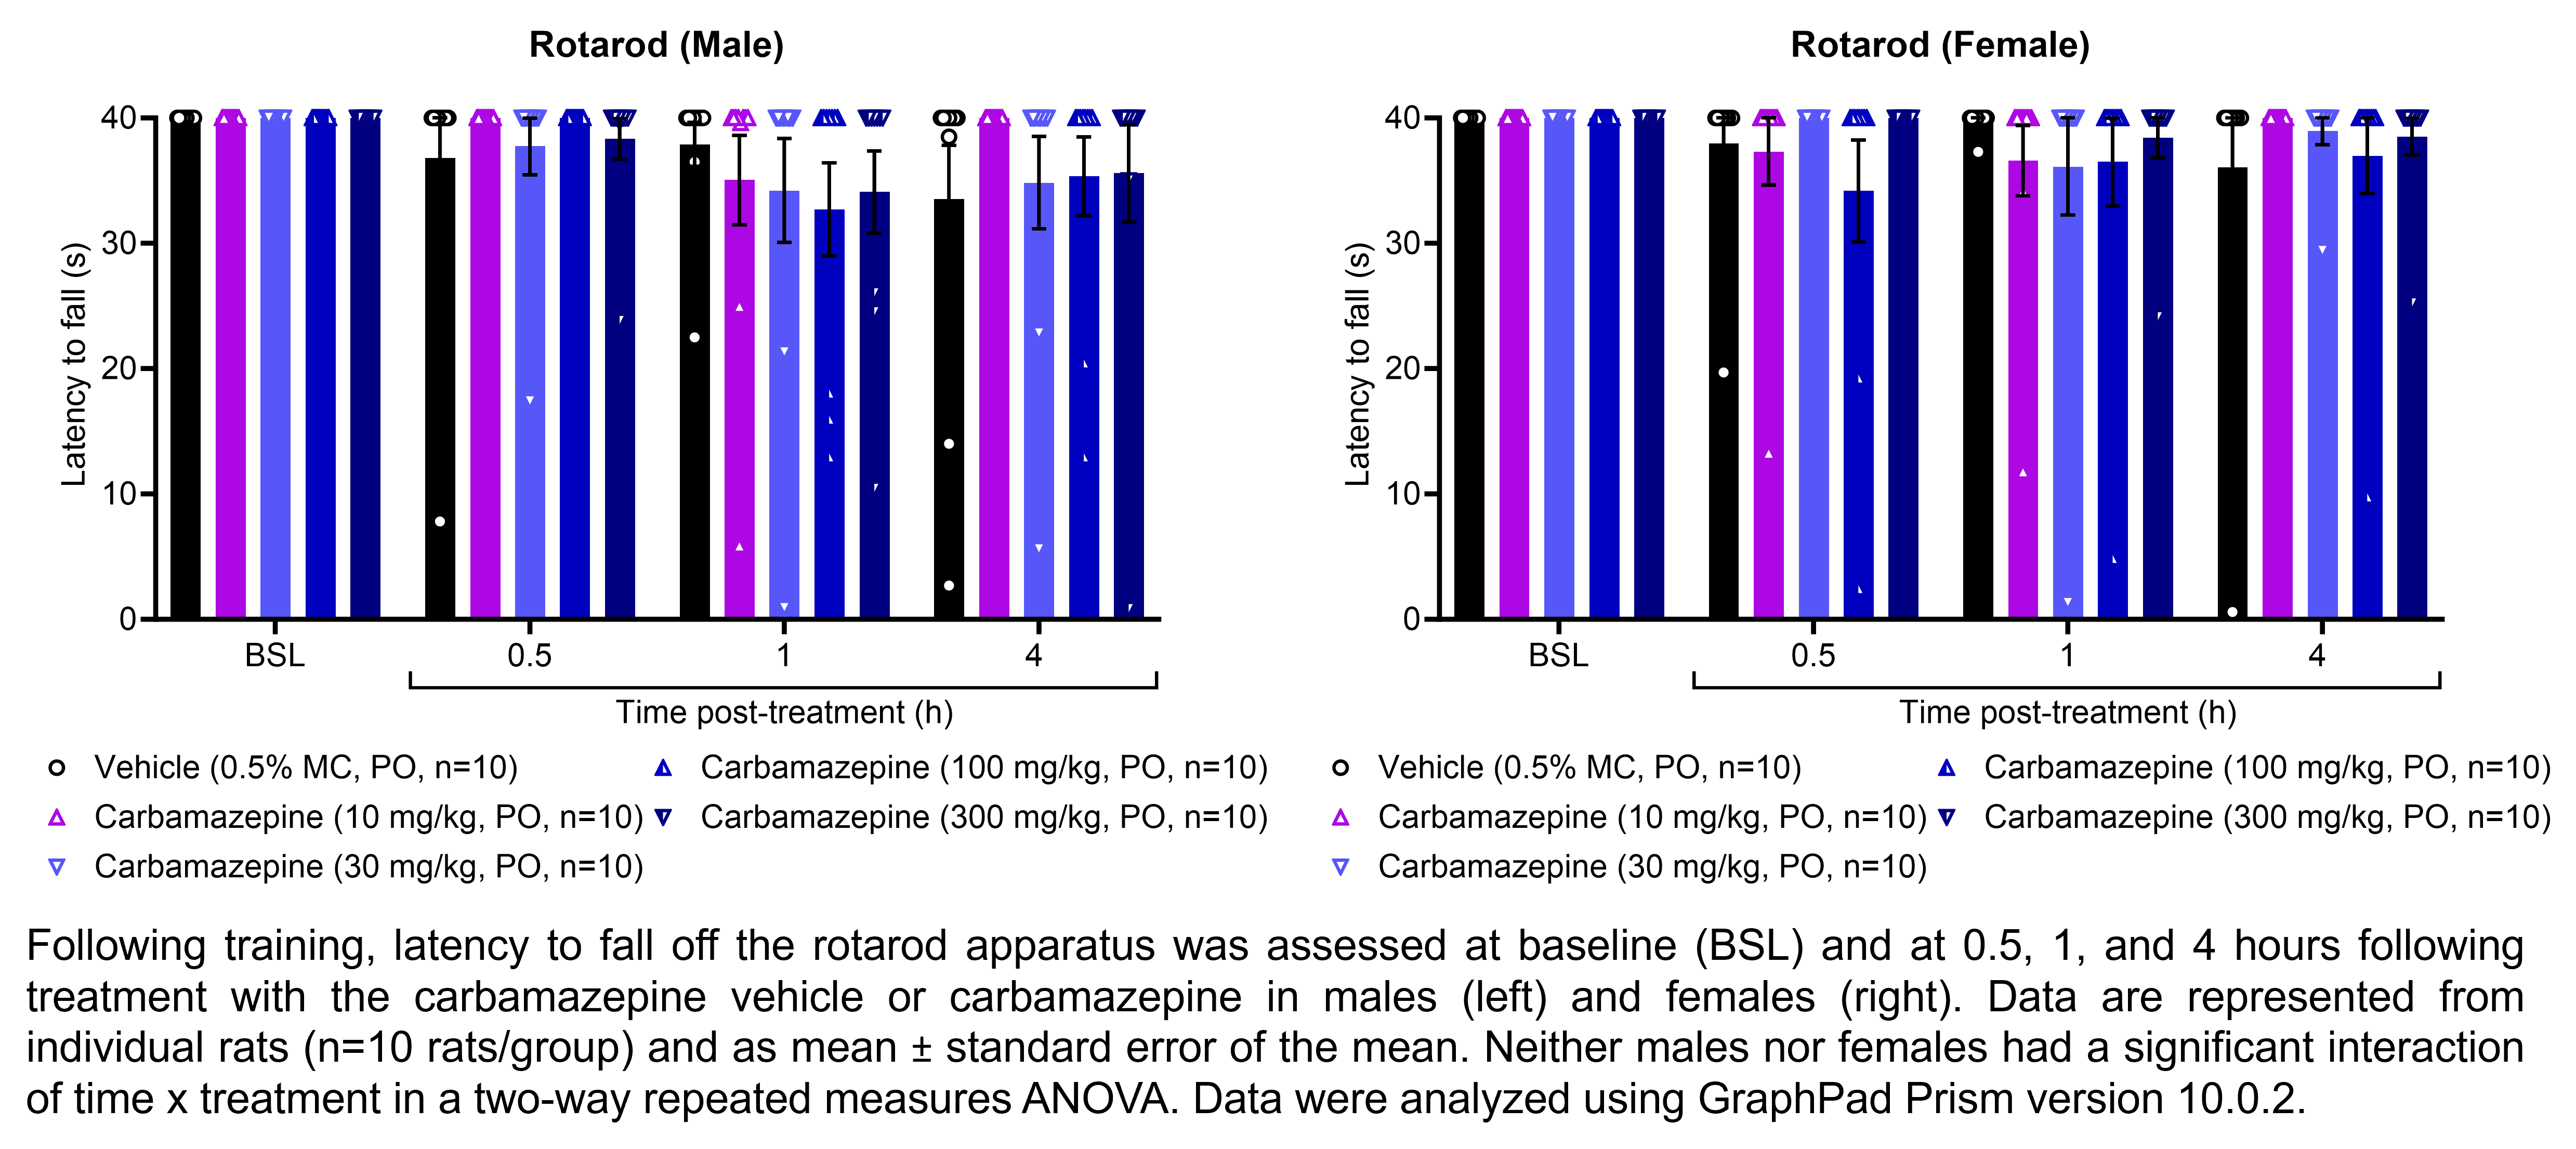 Two graphs show the latency for male or female rats to fall off a rotarod apparatus. Responses are shown at the following time points: baseline (before treatment) and at 0.5, 1, and 4 hours after treatment with vehicle (0.5% methylcellulose, delivered PO) or carbamazepine (10, 30, 100, or 300 mg/kg, delivered PO). There were 10 rats per group. Neither males nor females had a significant interaction of time x treatment in a two-way repeated measures ANOVA.